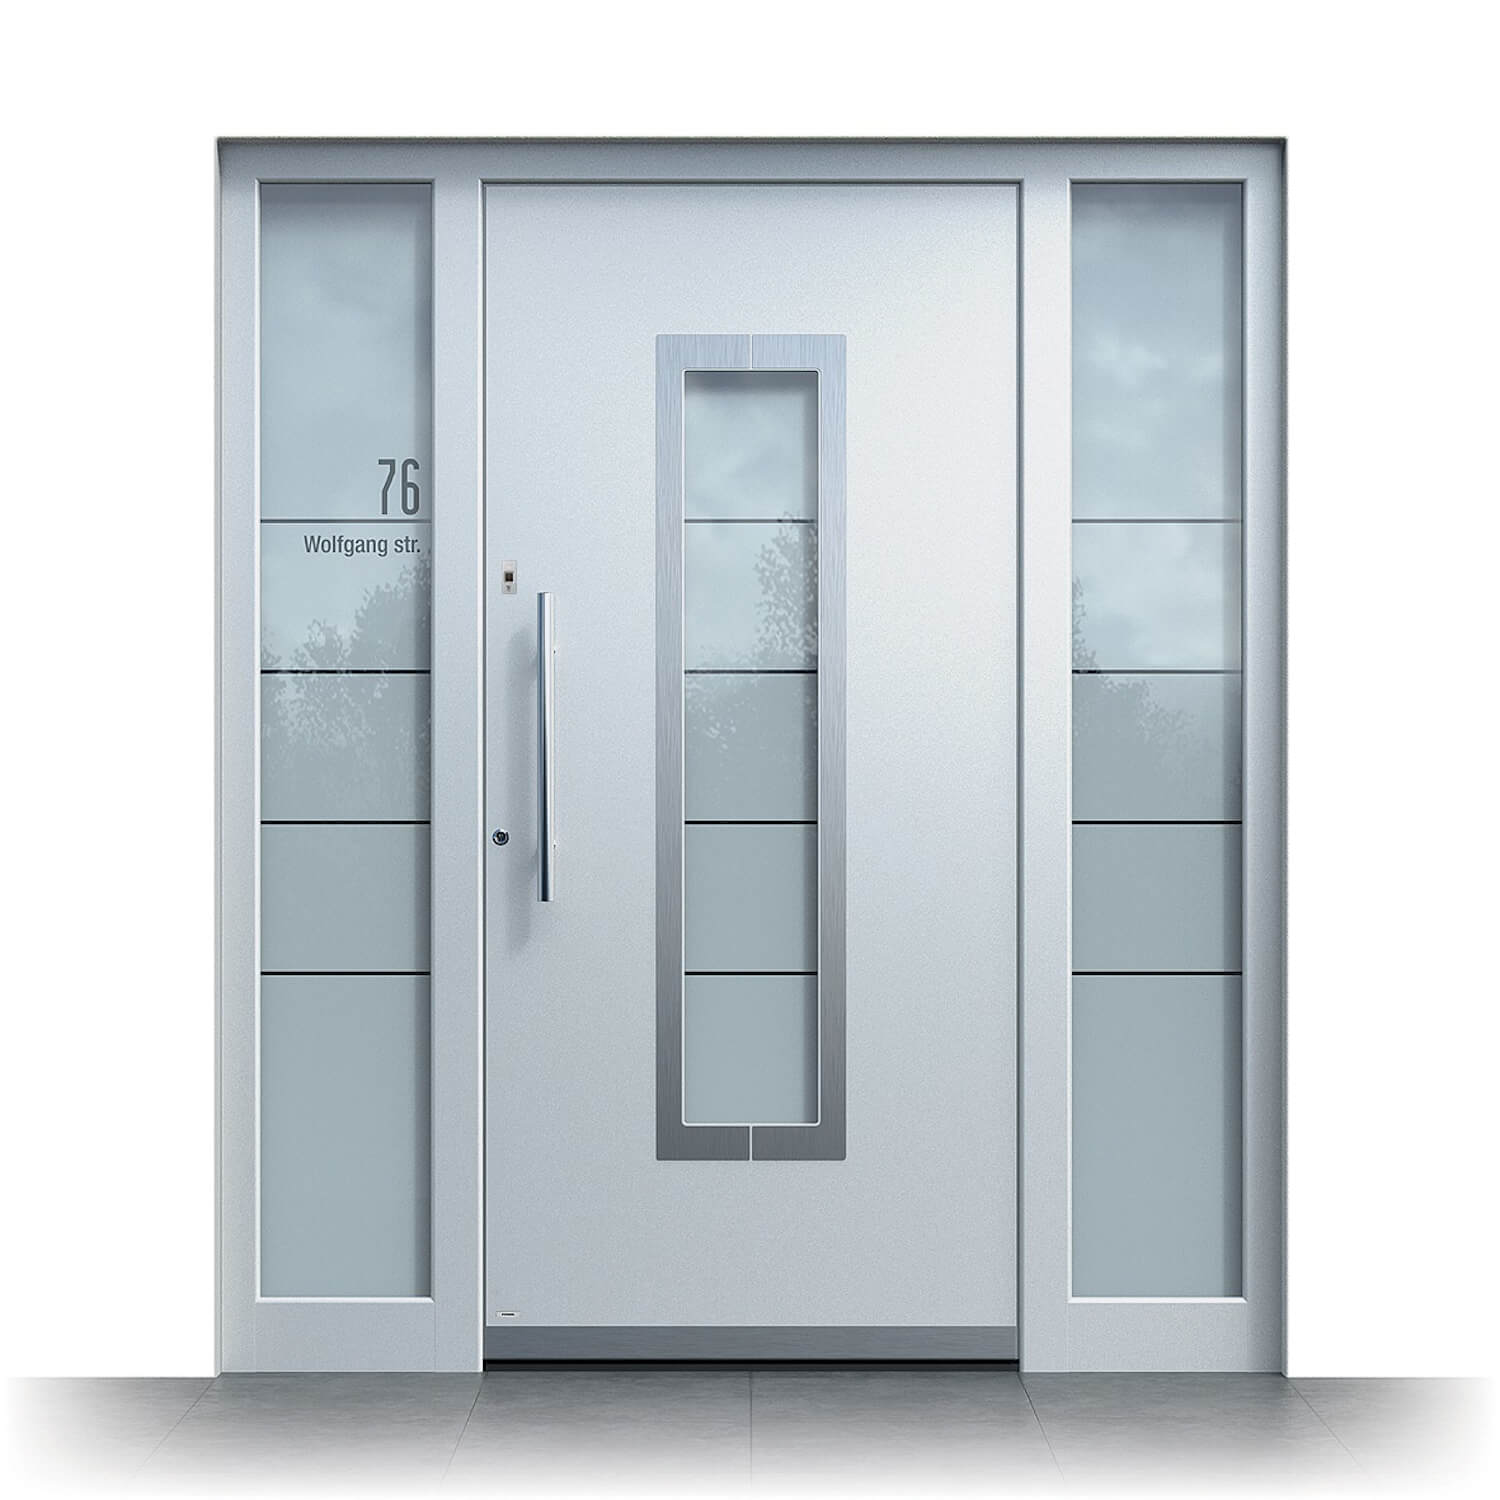 Madrid front door model featuring side panels in silver-grey